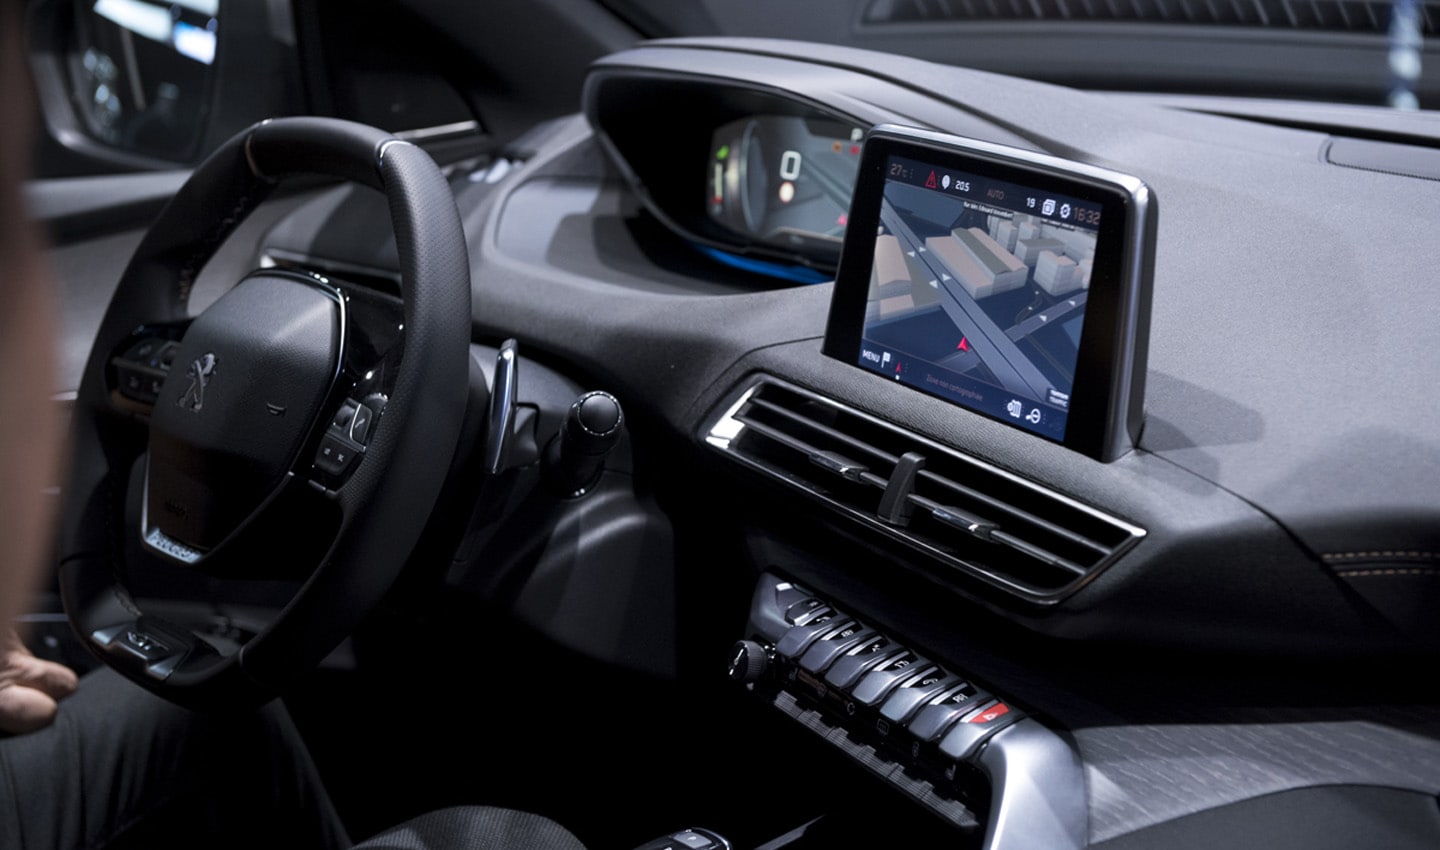 With intelligent speed assistance tech on the horizon, the days of the speedometer might be numbered.